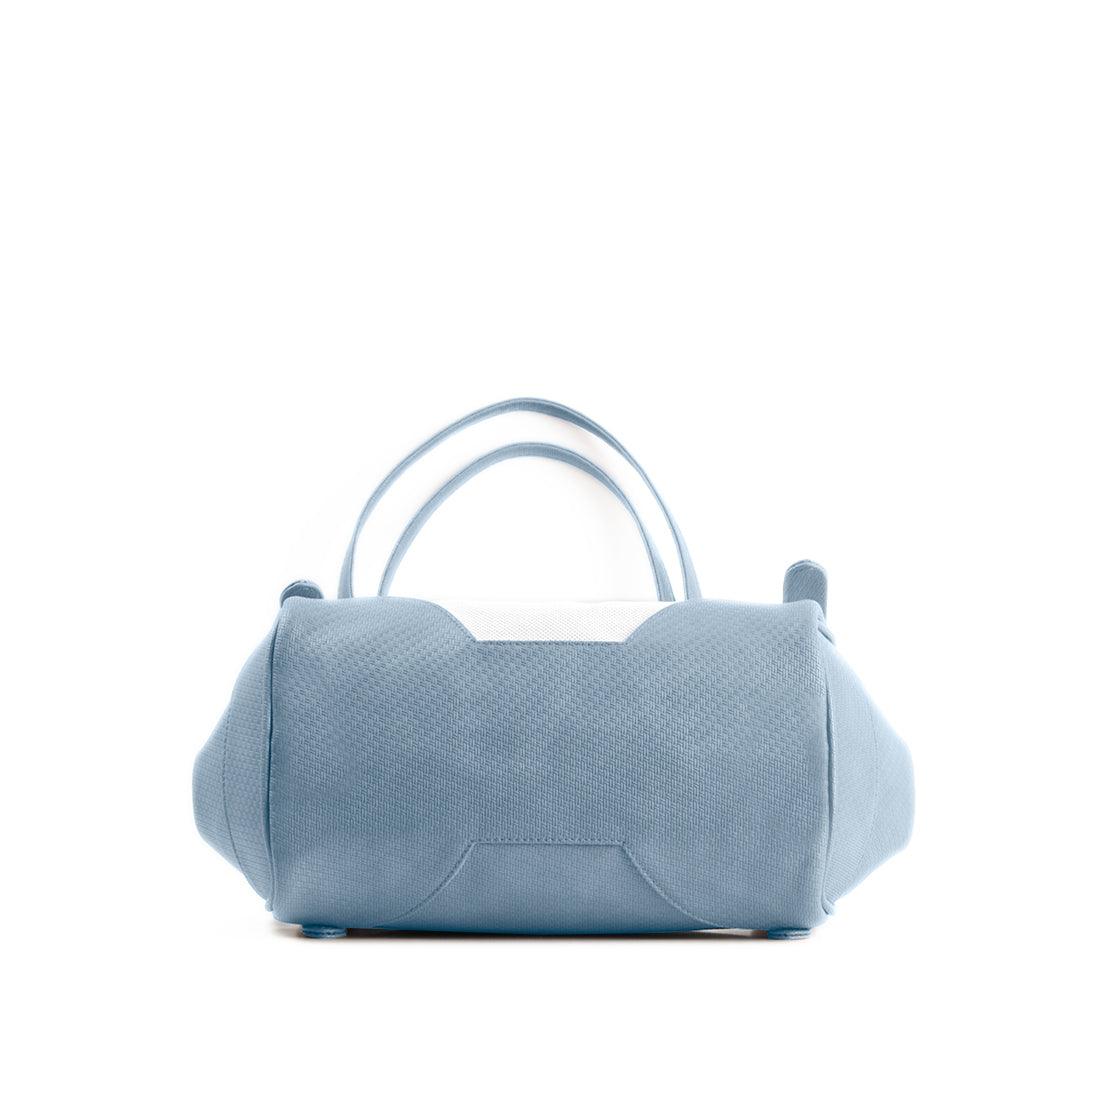 Blue Leather Tote Bag Jungles - CANVAEGYPT